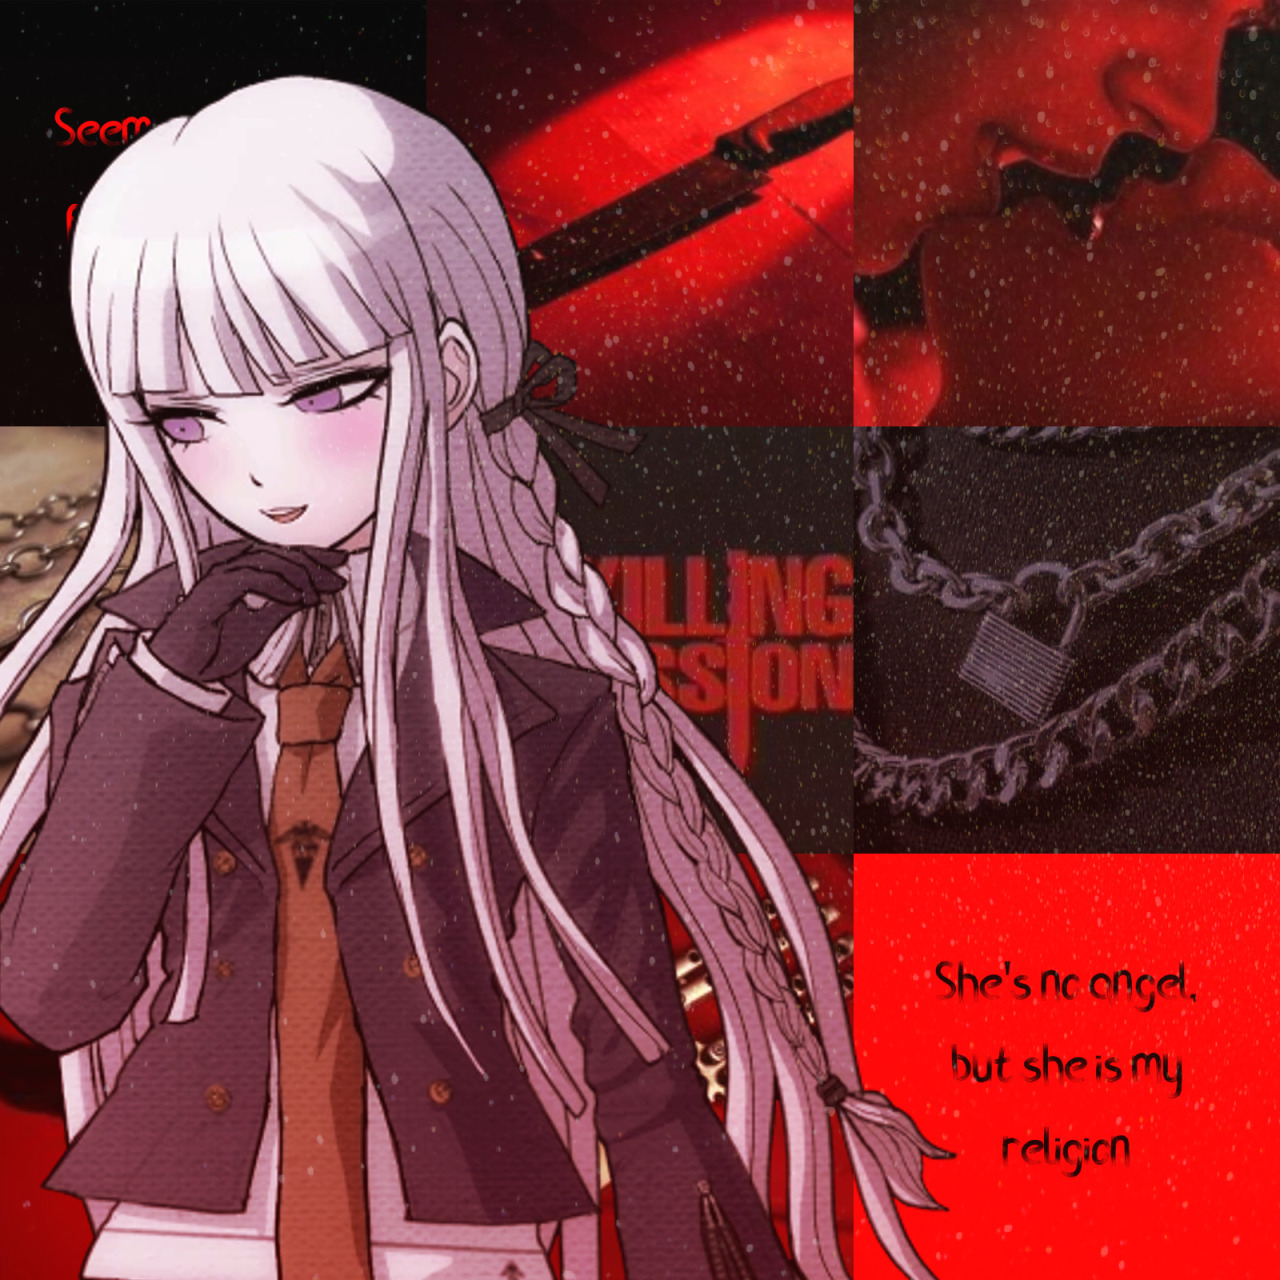 Kyoko Kirigiri Aesthetic BoardWith Themes of being in love with Junko Enoshima, Knives, Chains, Lyrics from Shes My Religion by Pale Waves, and Black and RedRequested by @pawn-turned-queen! #Danganronpa #Danganronpa Trigger Happy Havoc #Danganronpa THH#Kyoko Kirigiri#Kyoko#Danganronpa kin#DR kin #Kyoko Kirigiri kin #Fictionkin#Aesthetic Board